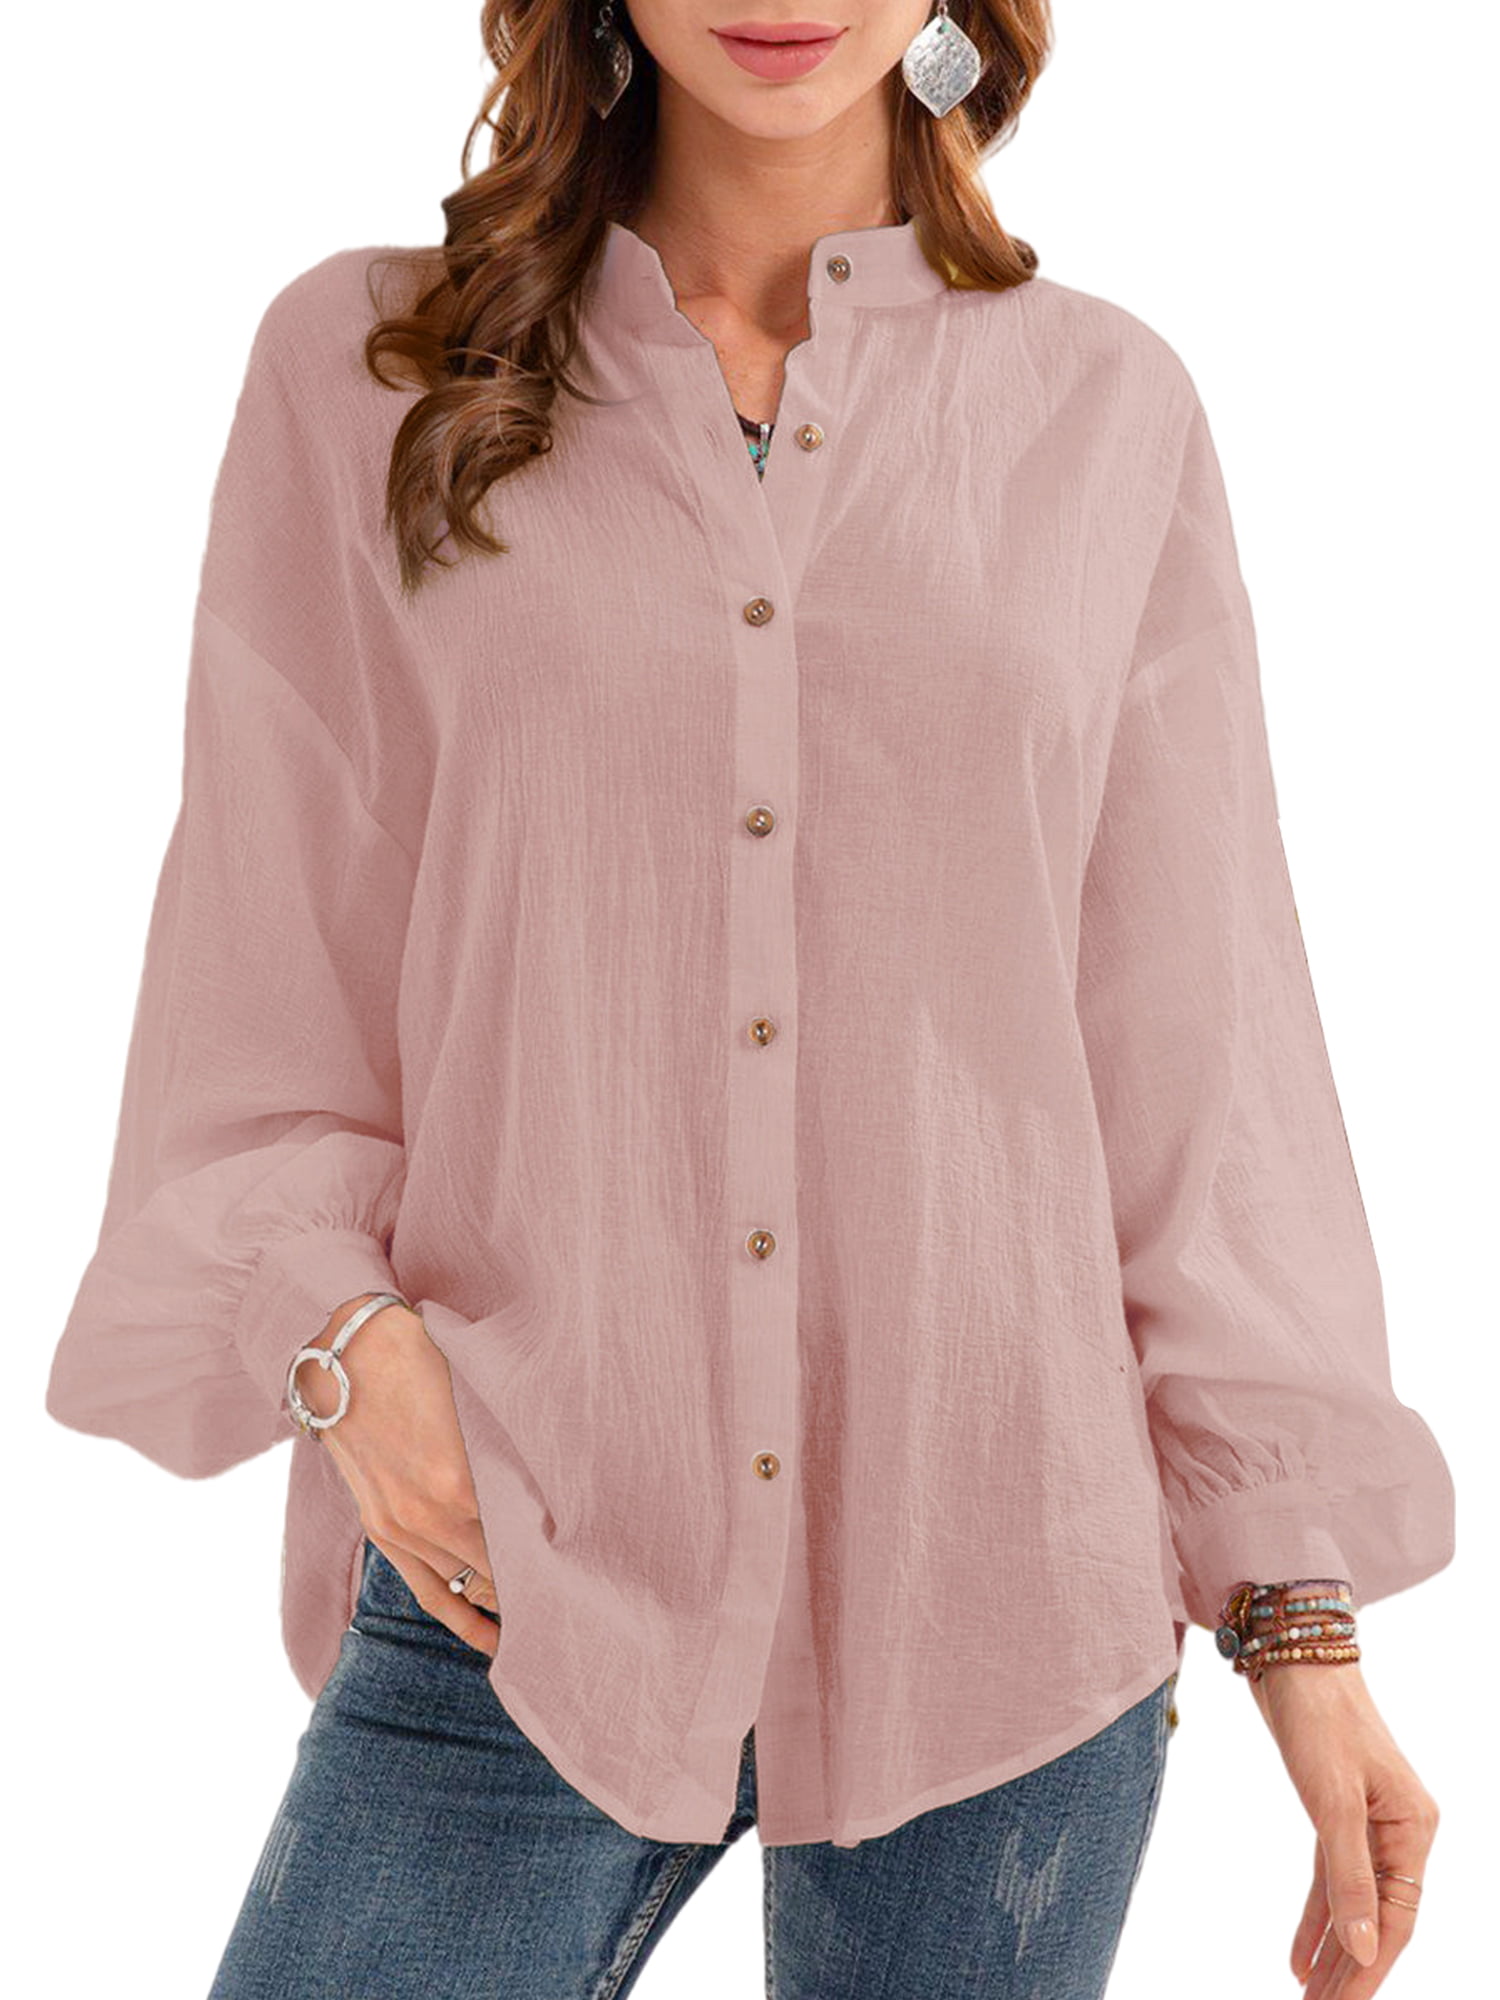 Womens Tops Lantern Long Sleeve Pleating V Neck Solid Color Blouse Shirts